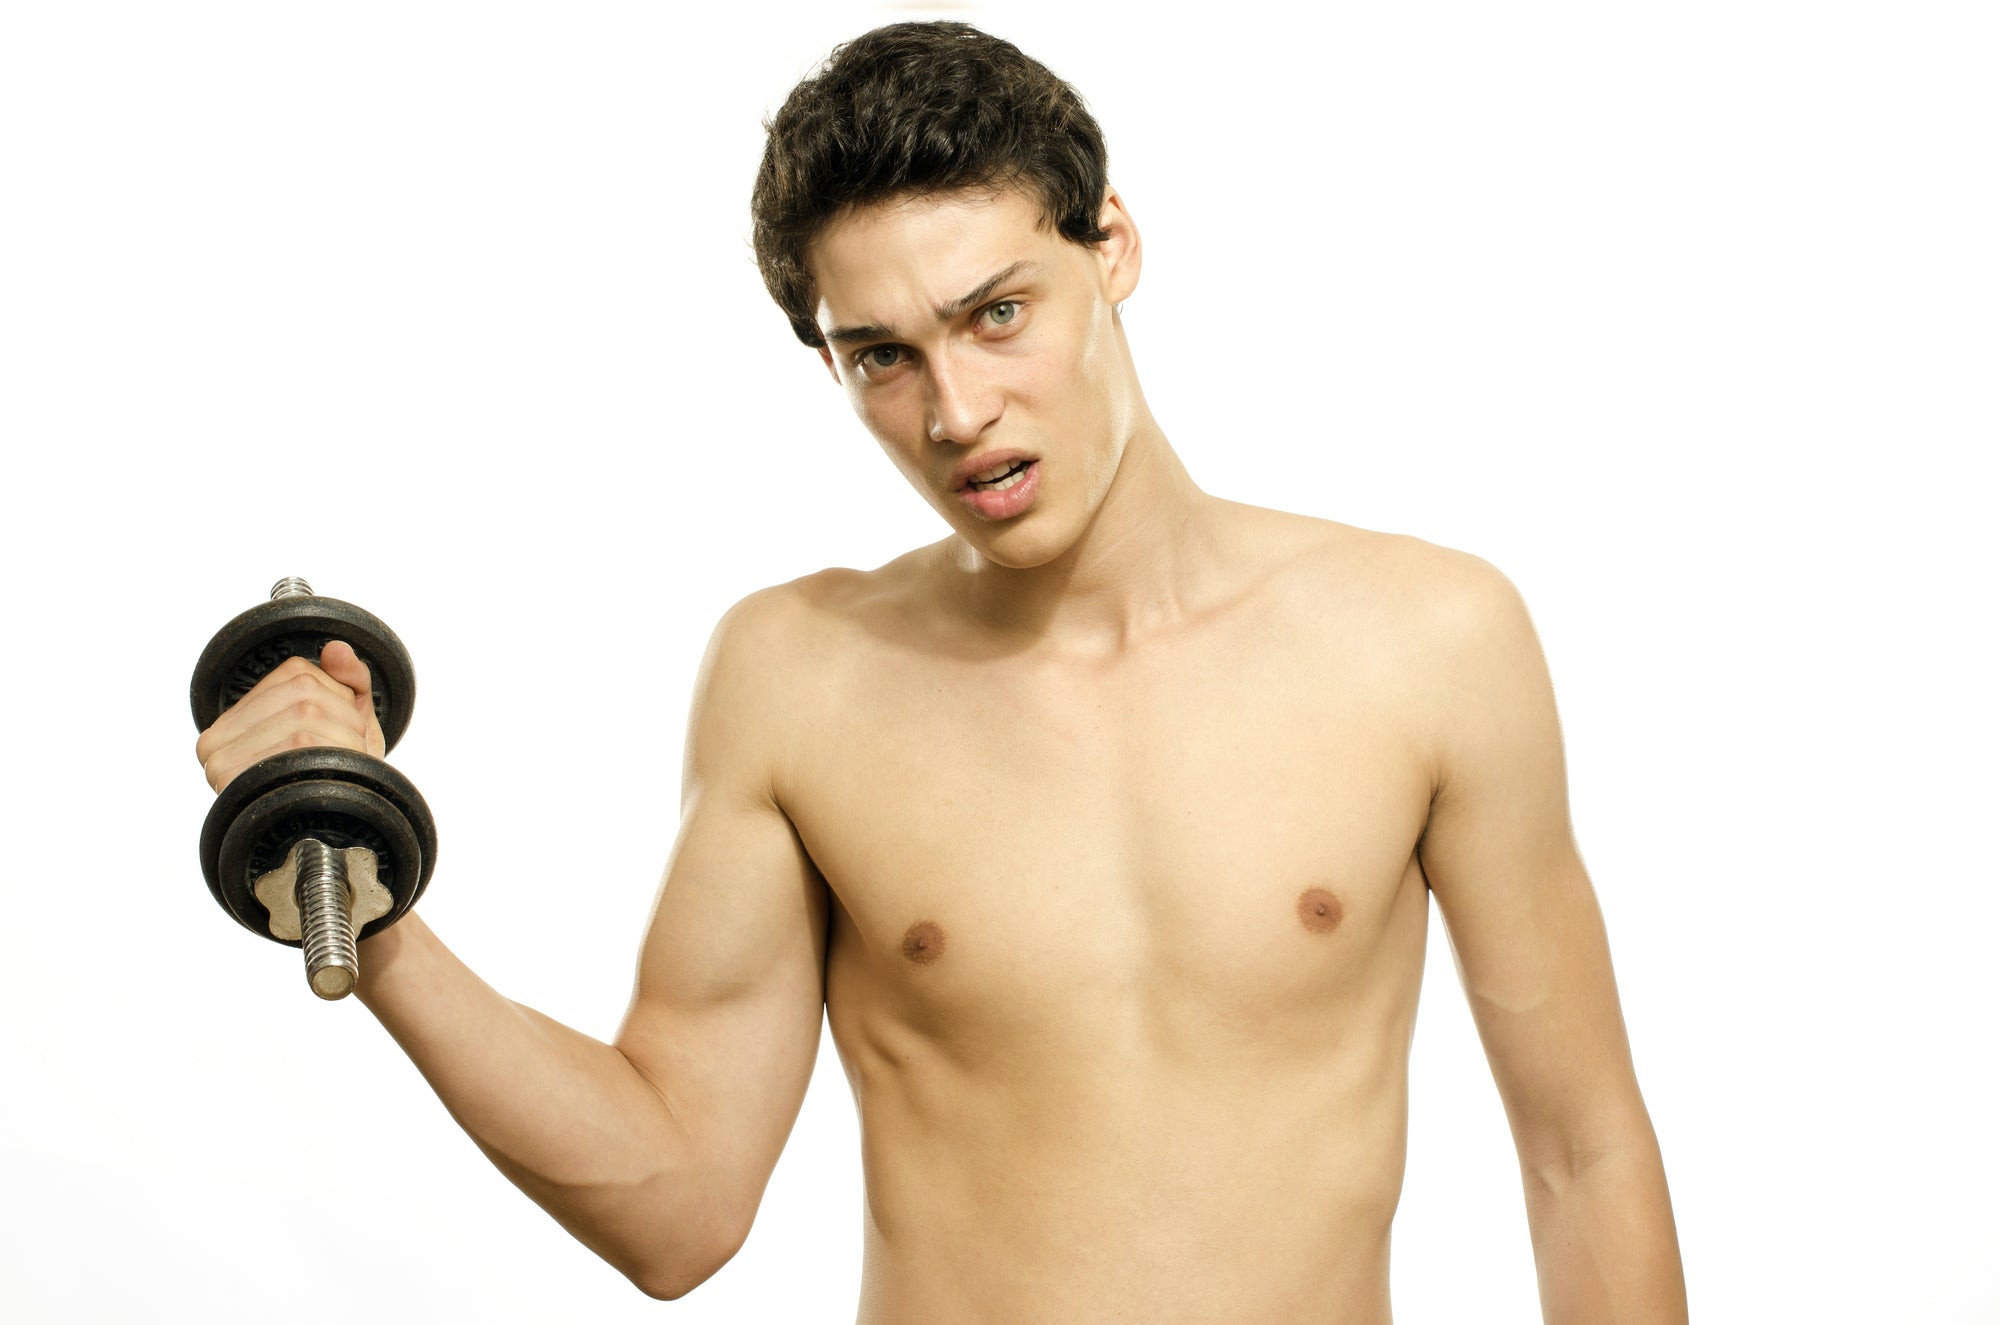 How to Lose Muscle Mass and Get Skinny